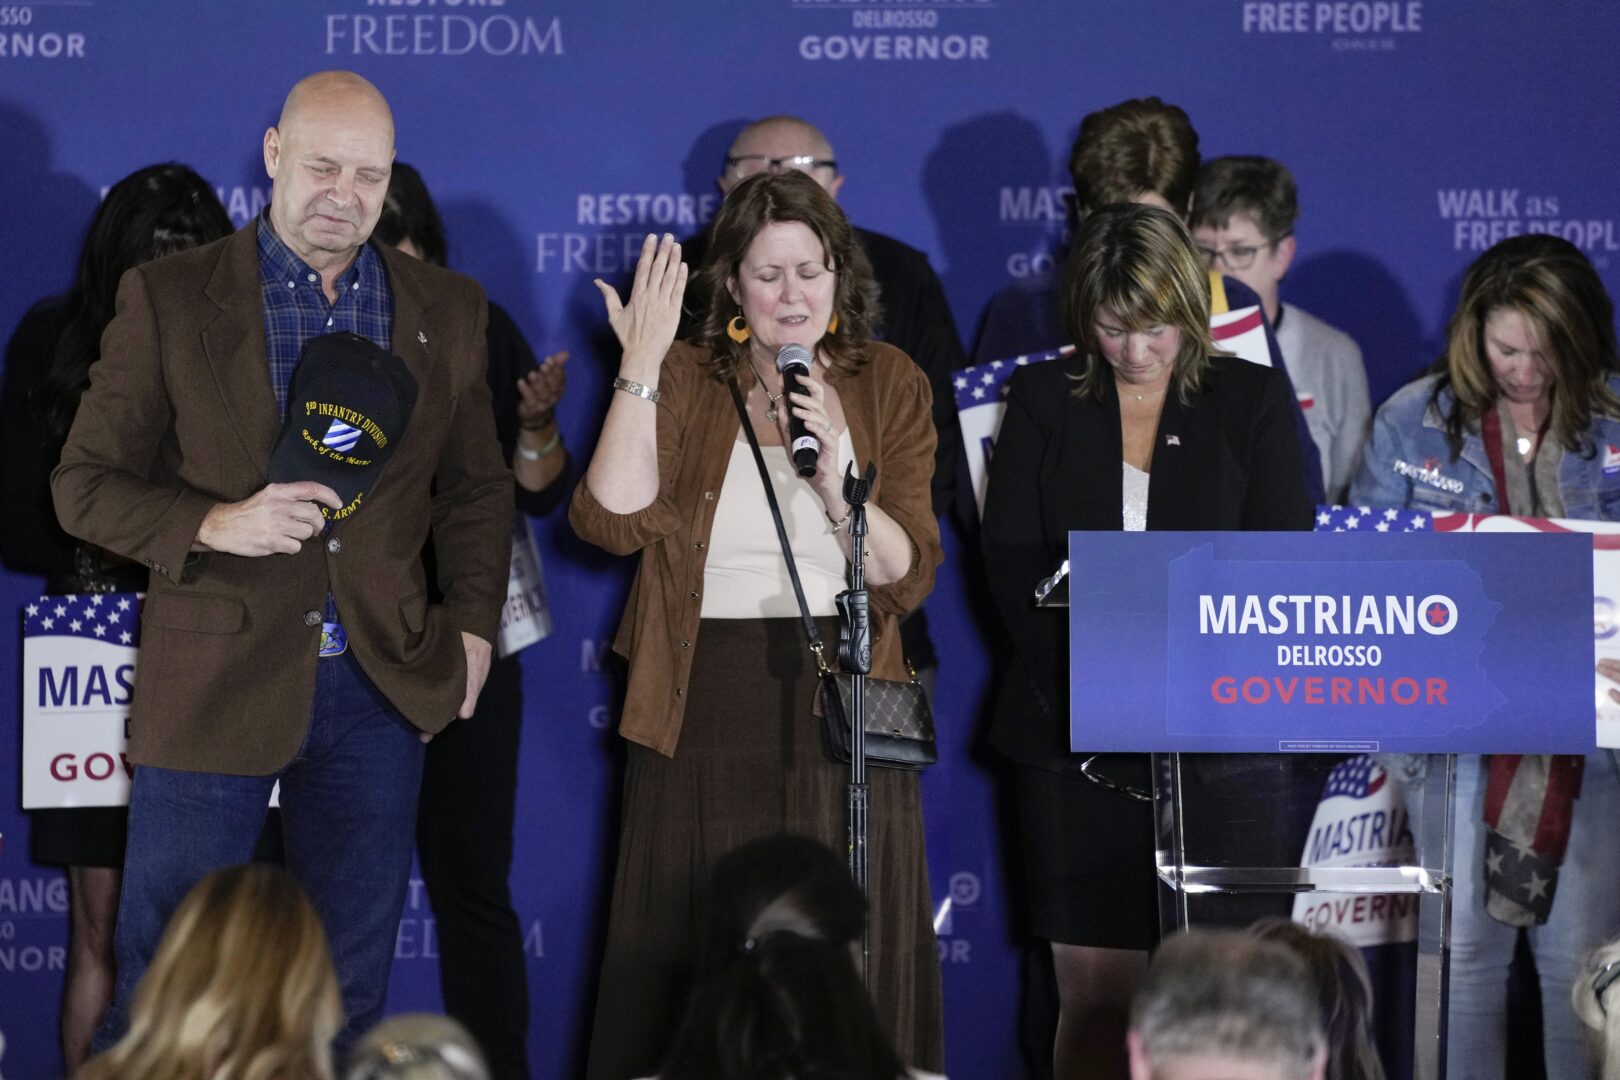 Pennsylvania Republican gubernatorial candidate Doug Mastriano, his wife Rebecca Mastriano, and running mate Carrie Lewis DelRosso pray on stage with supporters during his election night campaign gathering at the Penn Harris Hotel in Camp Hill, Pa., Tuesday, Nov. 8, 2022. Democrat Josh Shapiro won the race for governor of Pennsylvania.